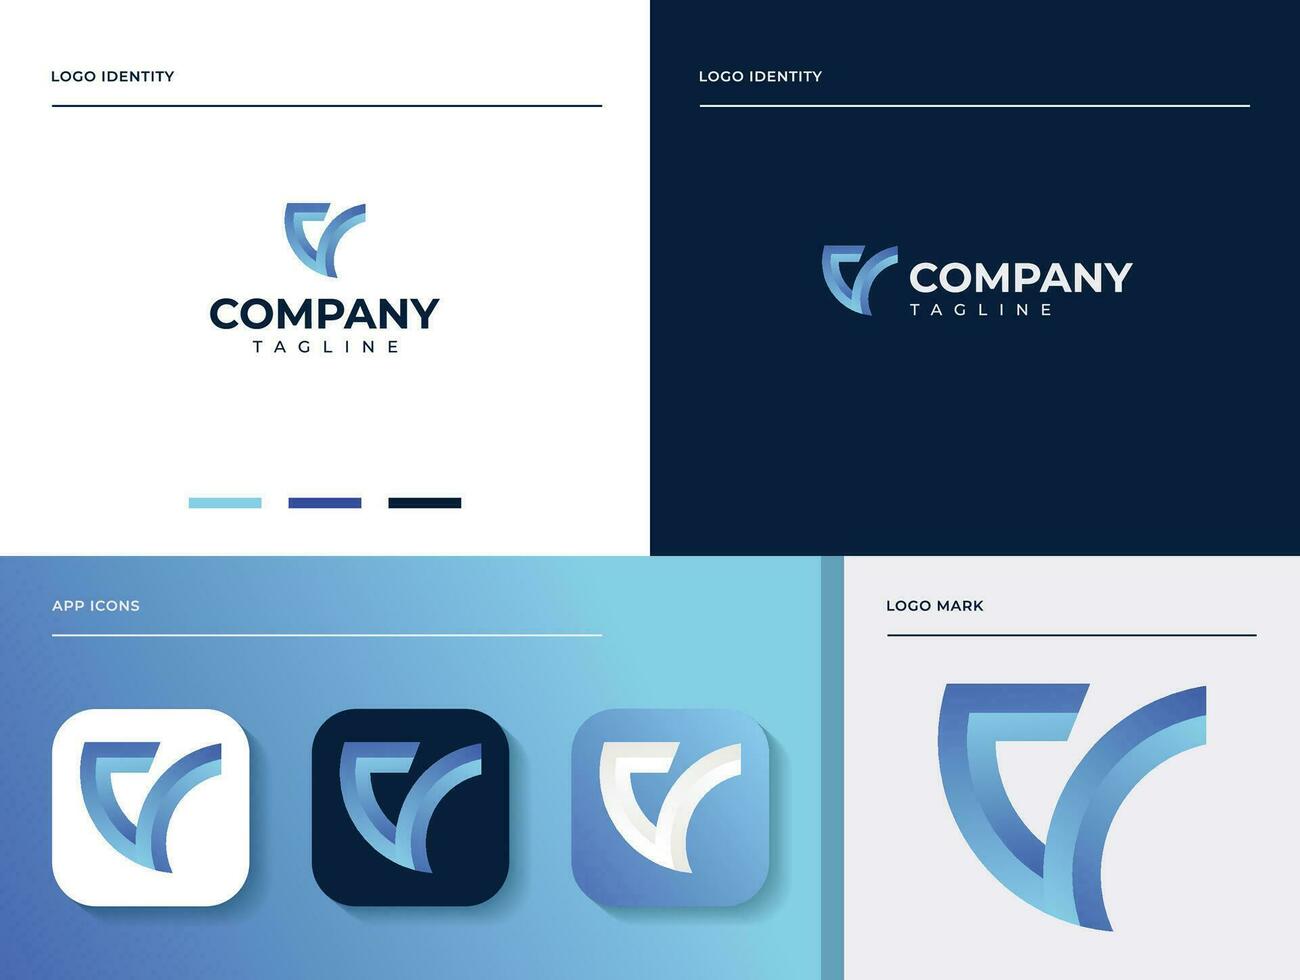 Abstract Initial Letter V Logo Design Template Elements. Easy to use in various media. The mark itself will looks nice as social media avatar and website or mobile icon. vector